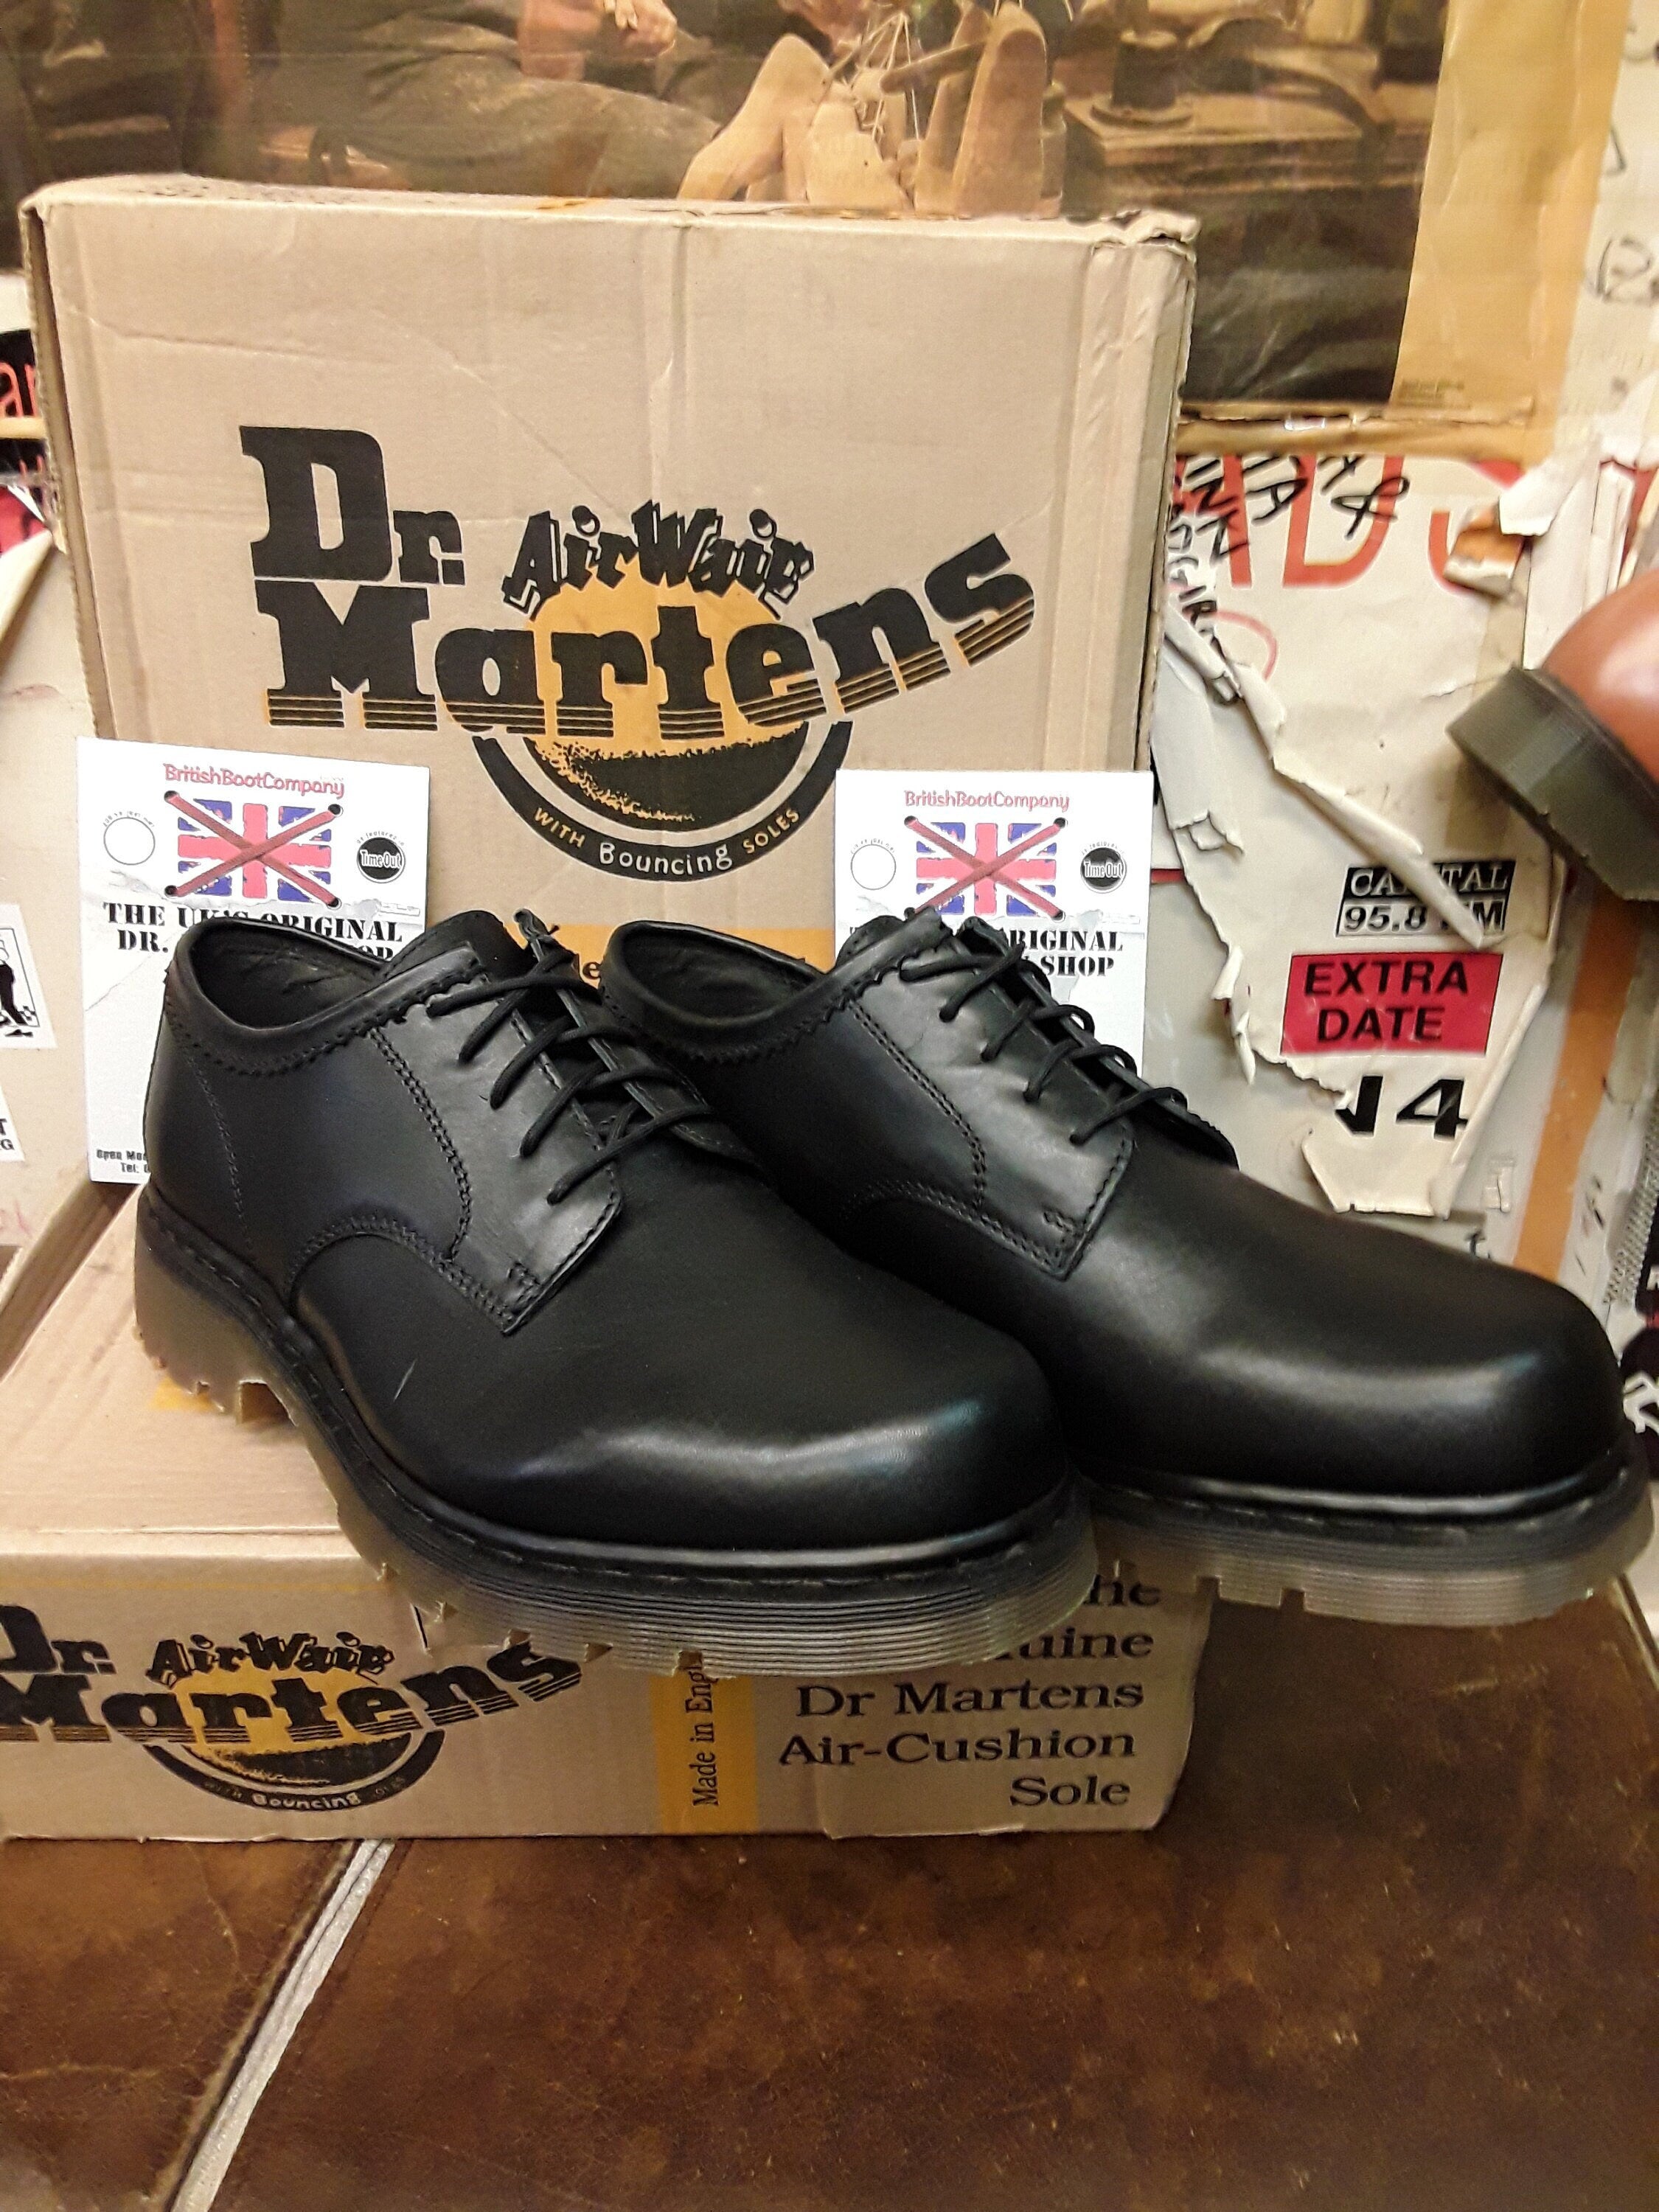 Dr. Martens 5hole made in England